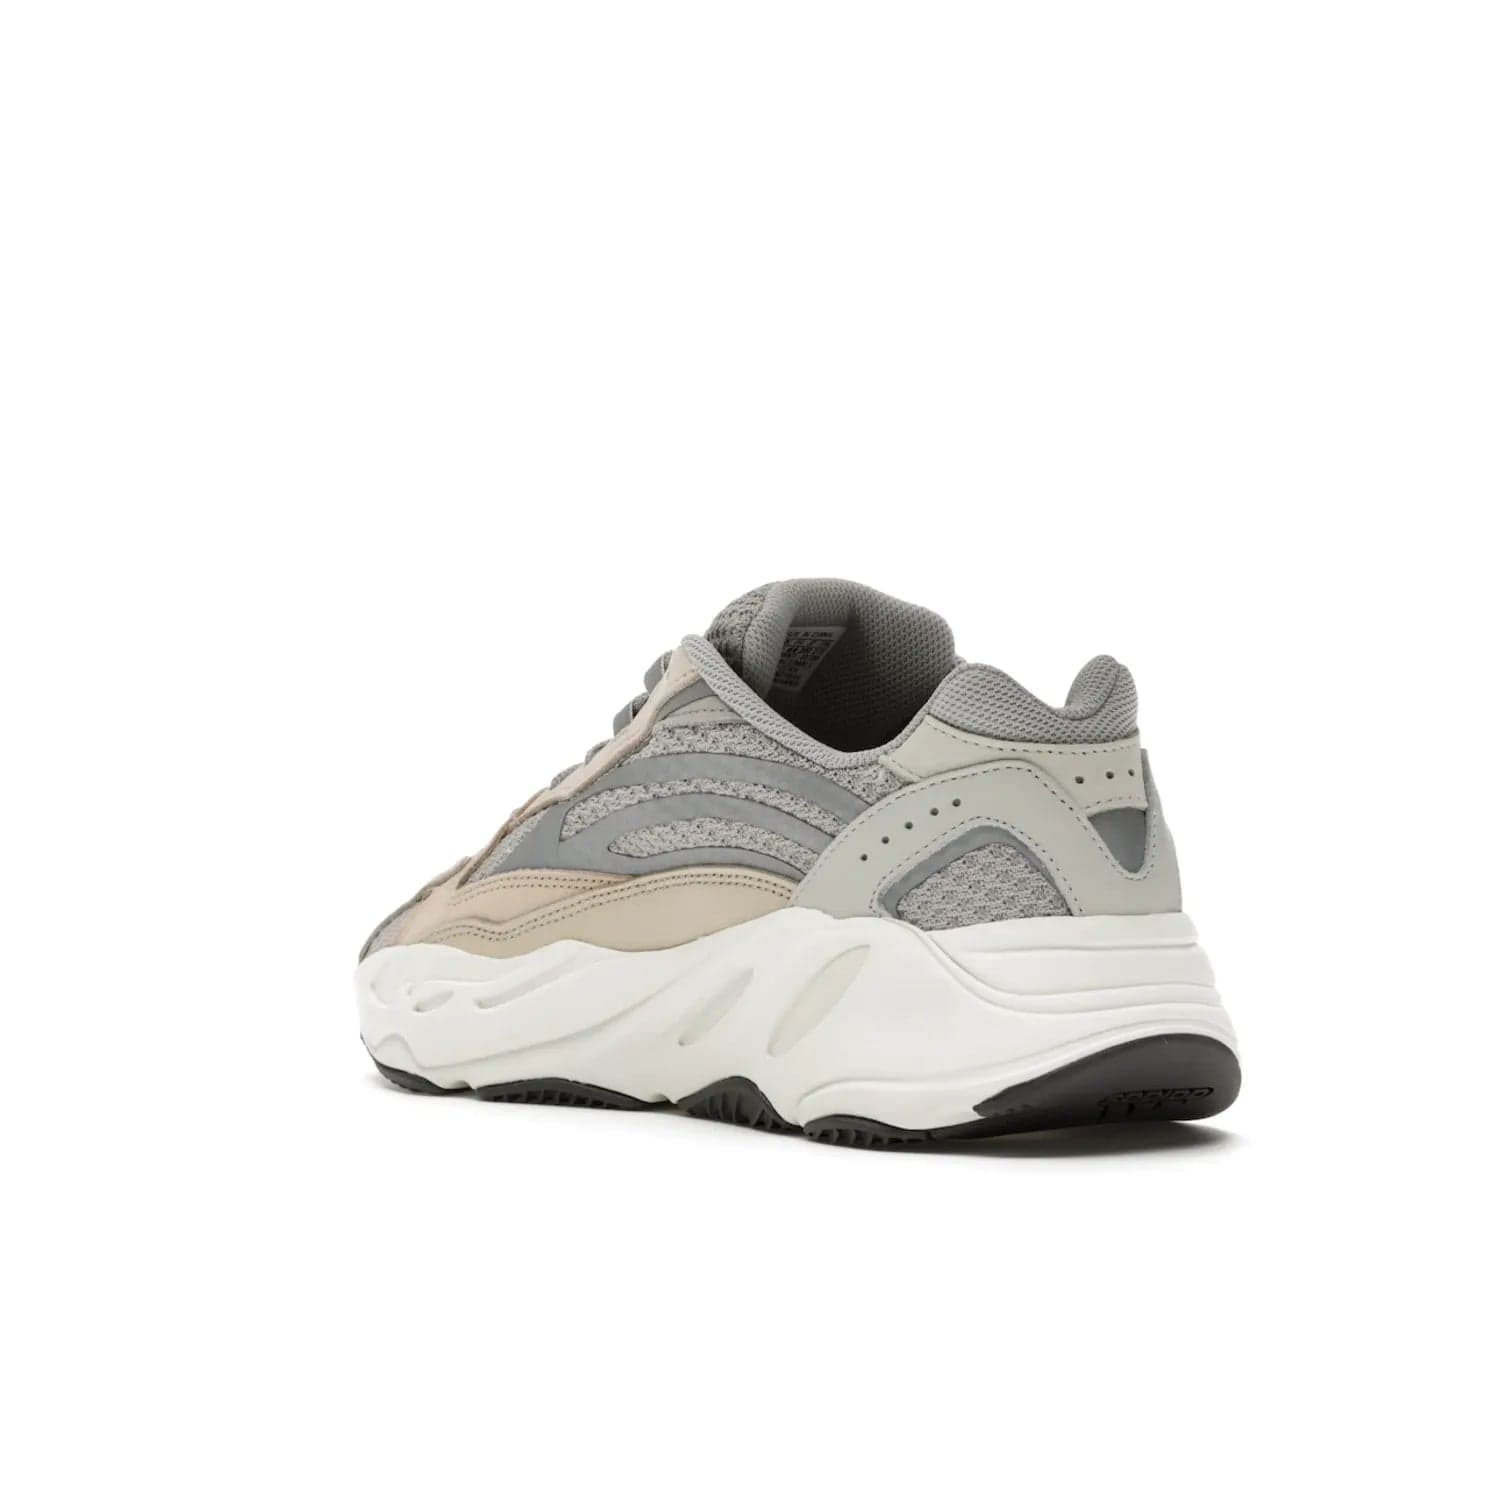 adidas Yeezy Boost 700 V2 Cream - Image 24 - Only at www.BallersClubKickz.com - Add style and luxury to your wardrobe with the adidas Yeezy 700 V2 Cream. Featuring a unique reflective upper, leather overlays, mesh underlays and the signature BOOST midsole, this silhouette is perfect for any stylish wardrobe.